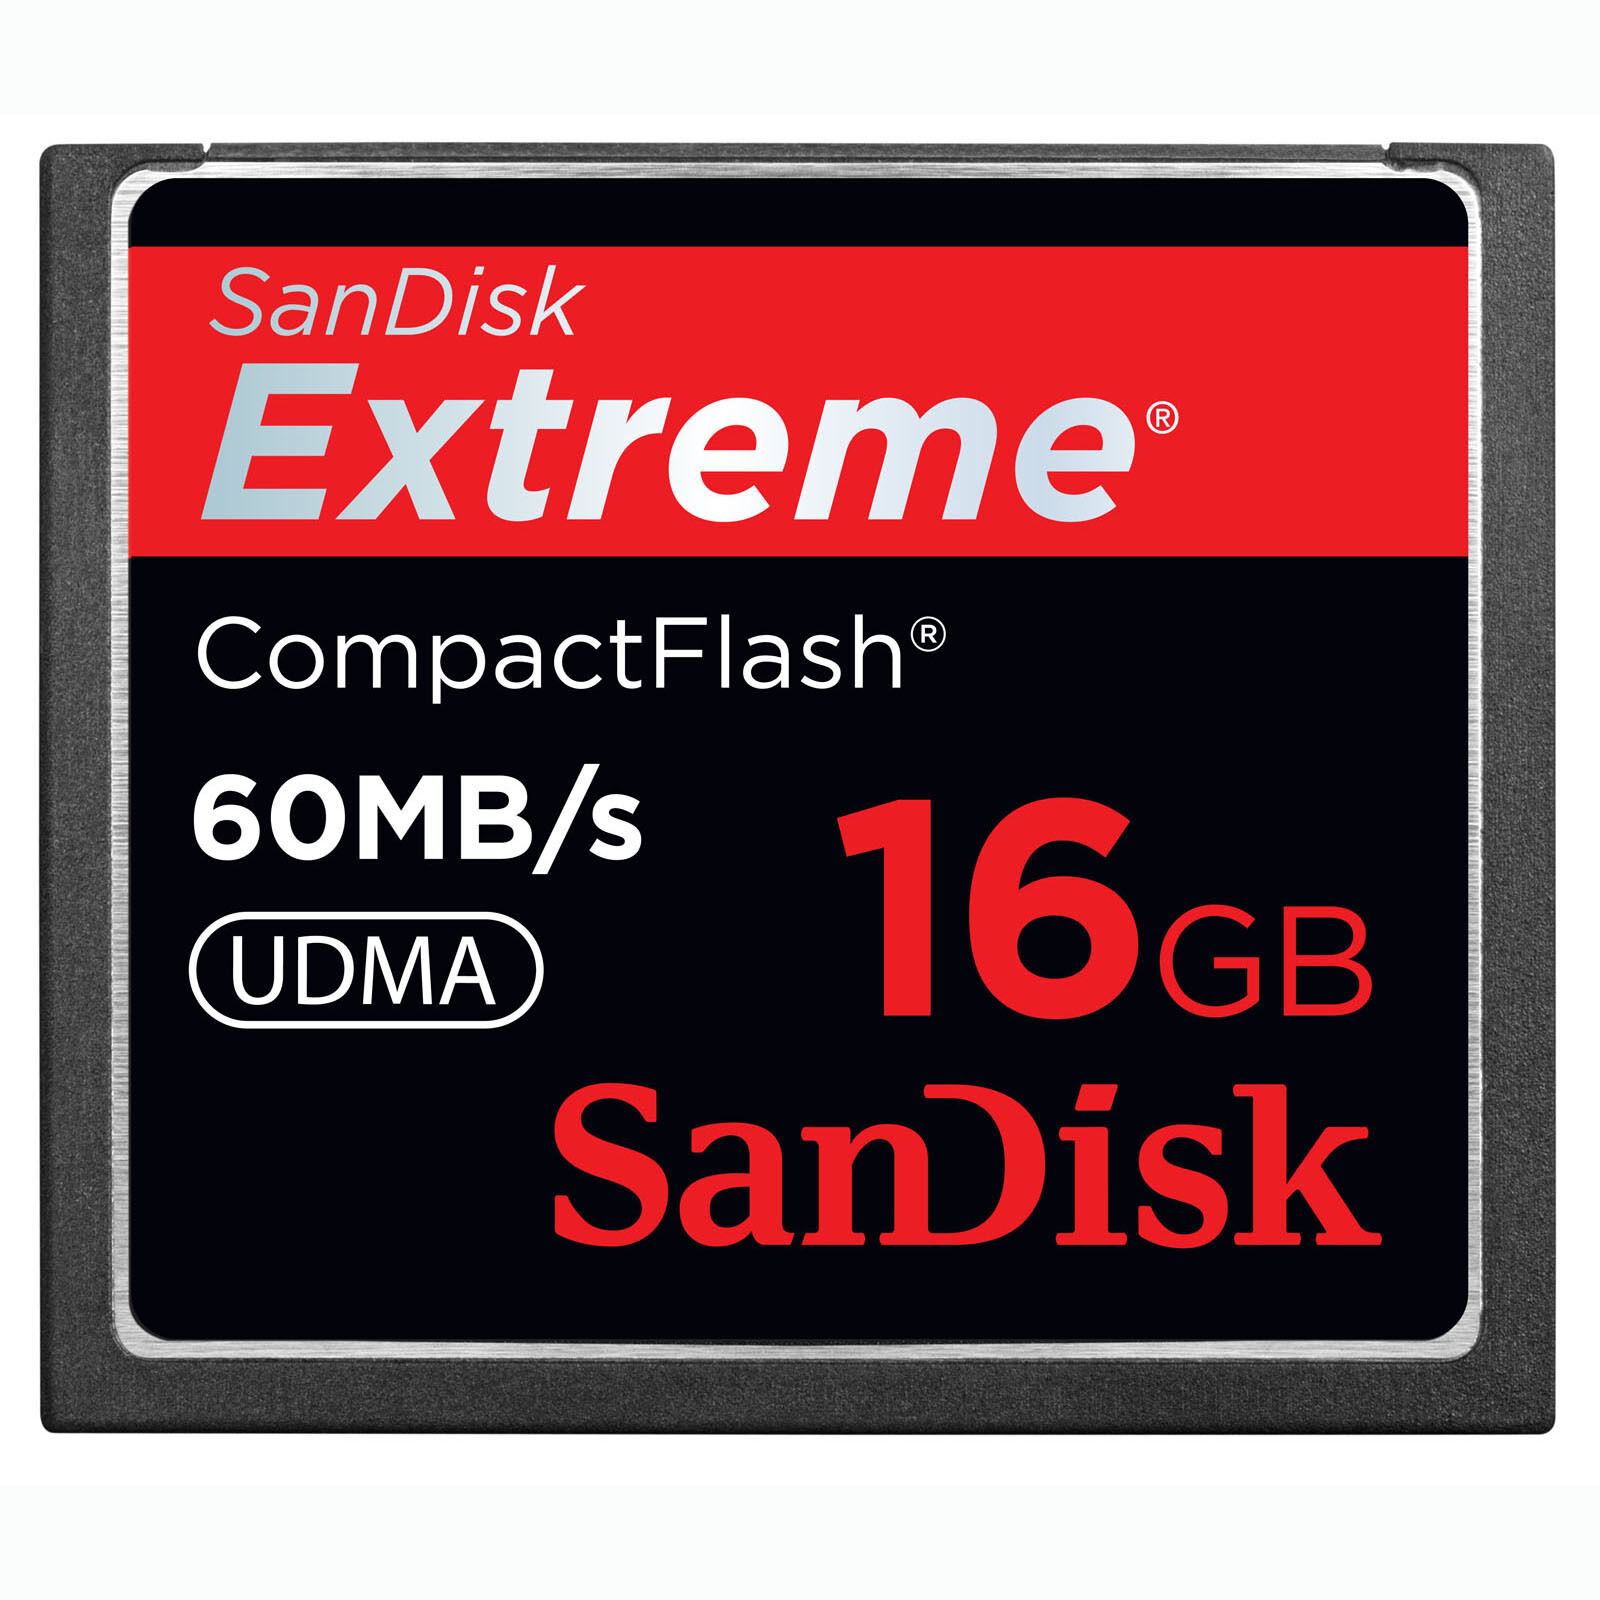 SanDisk 16GB Extreme PRO Compact Flash 60MB/s Memory Card Image